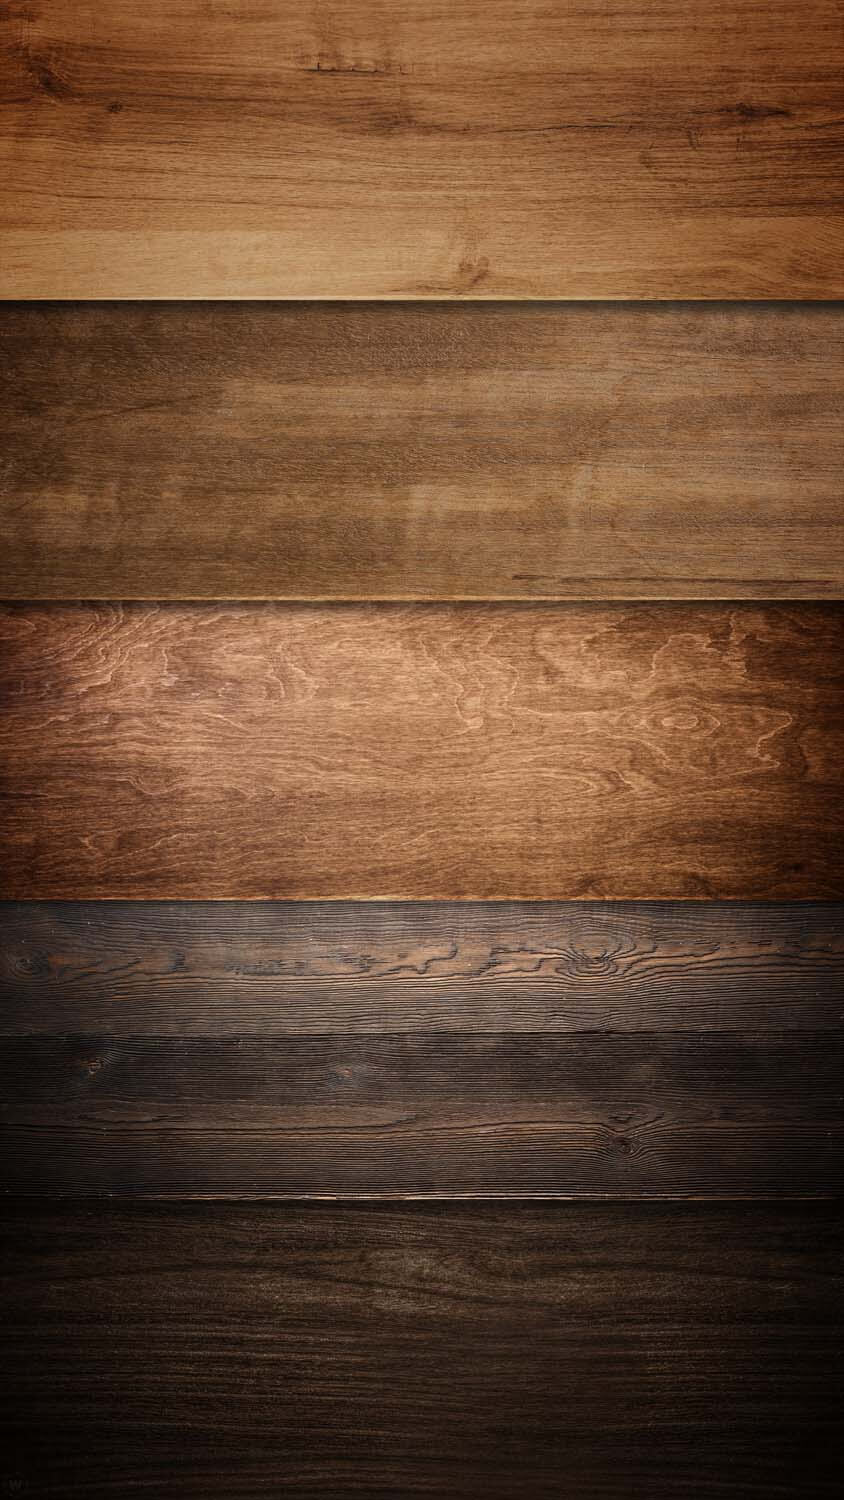 Wooden Background IPhone Wallpaper HD  IPhone Wallpapers